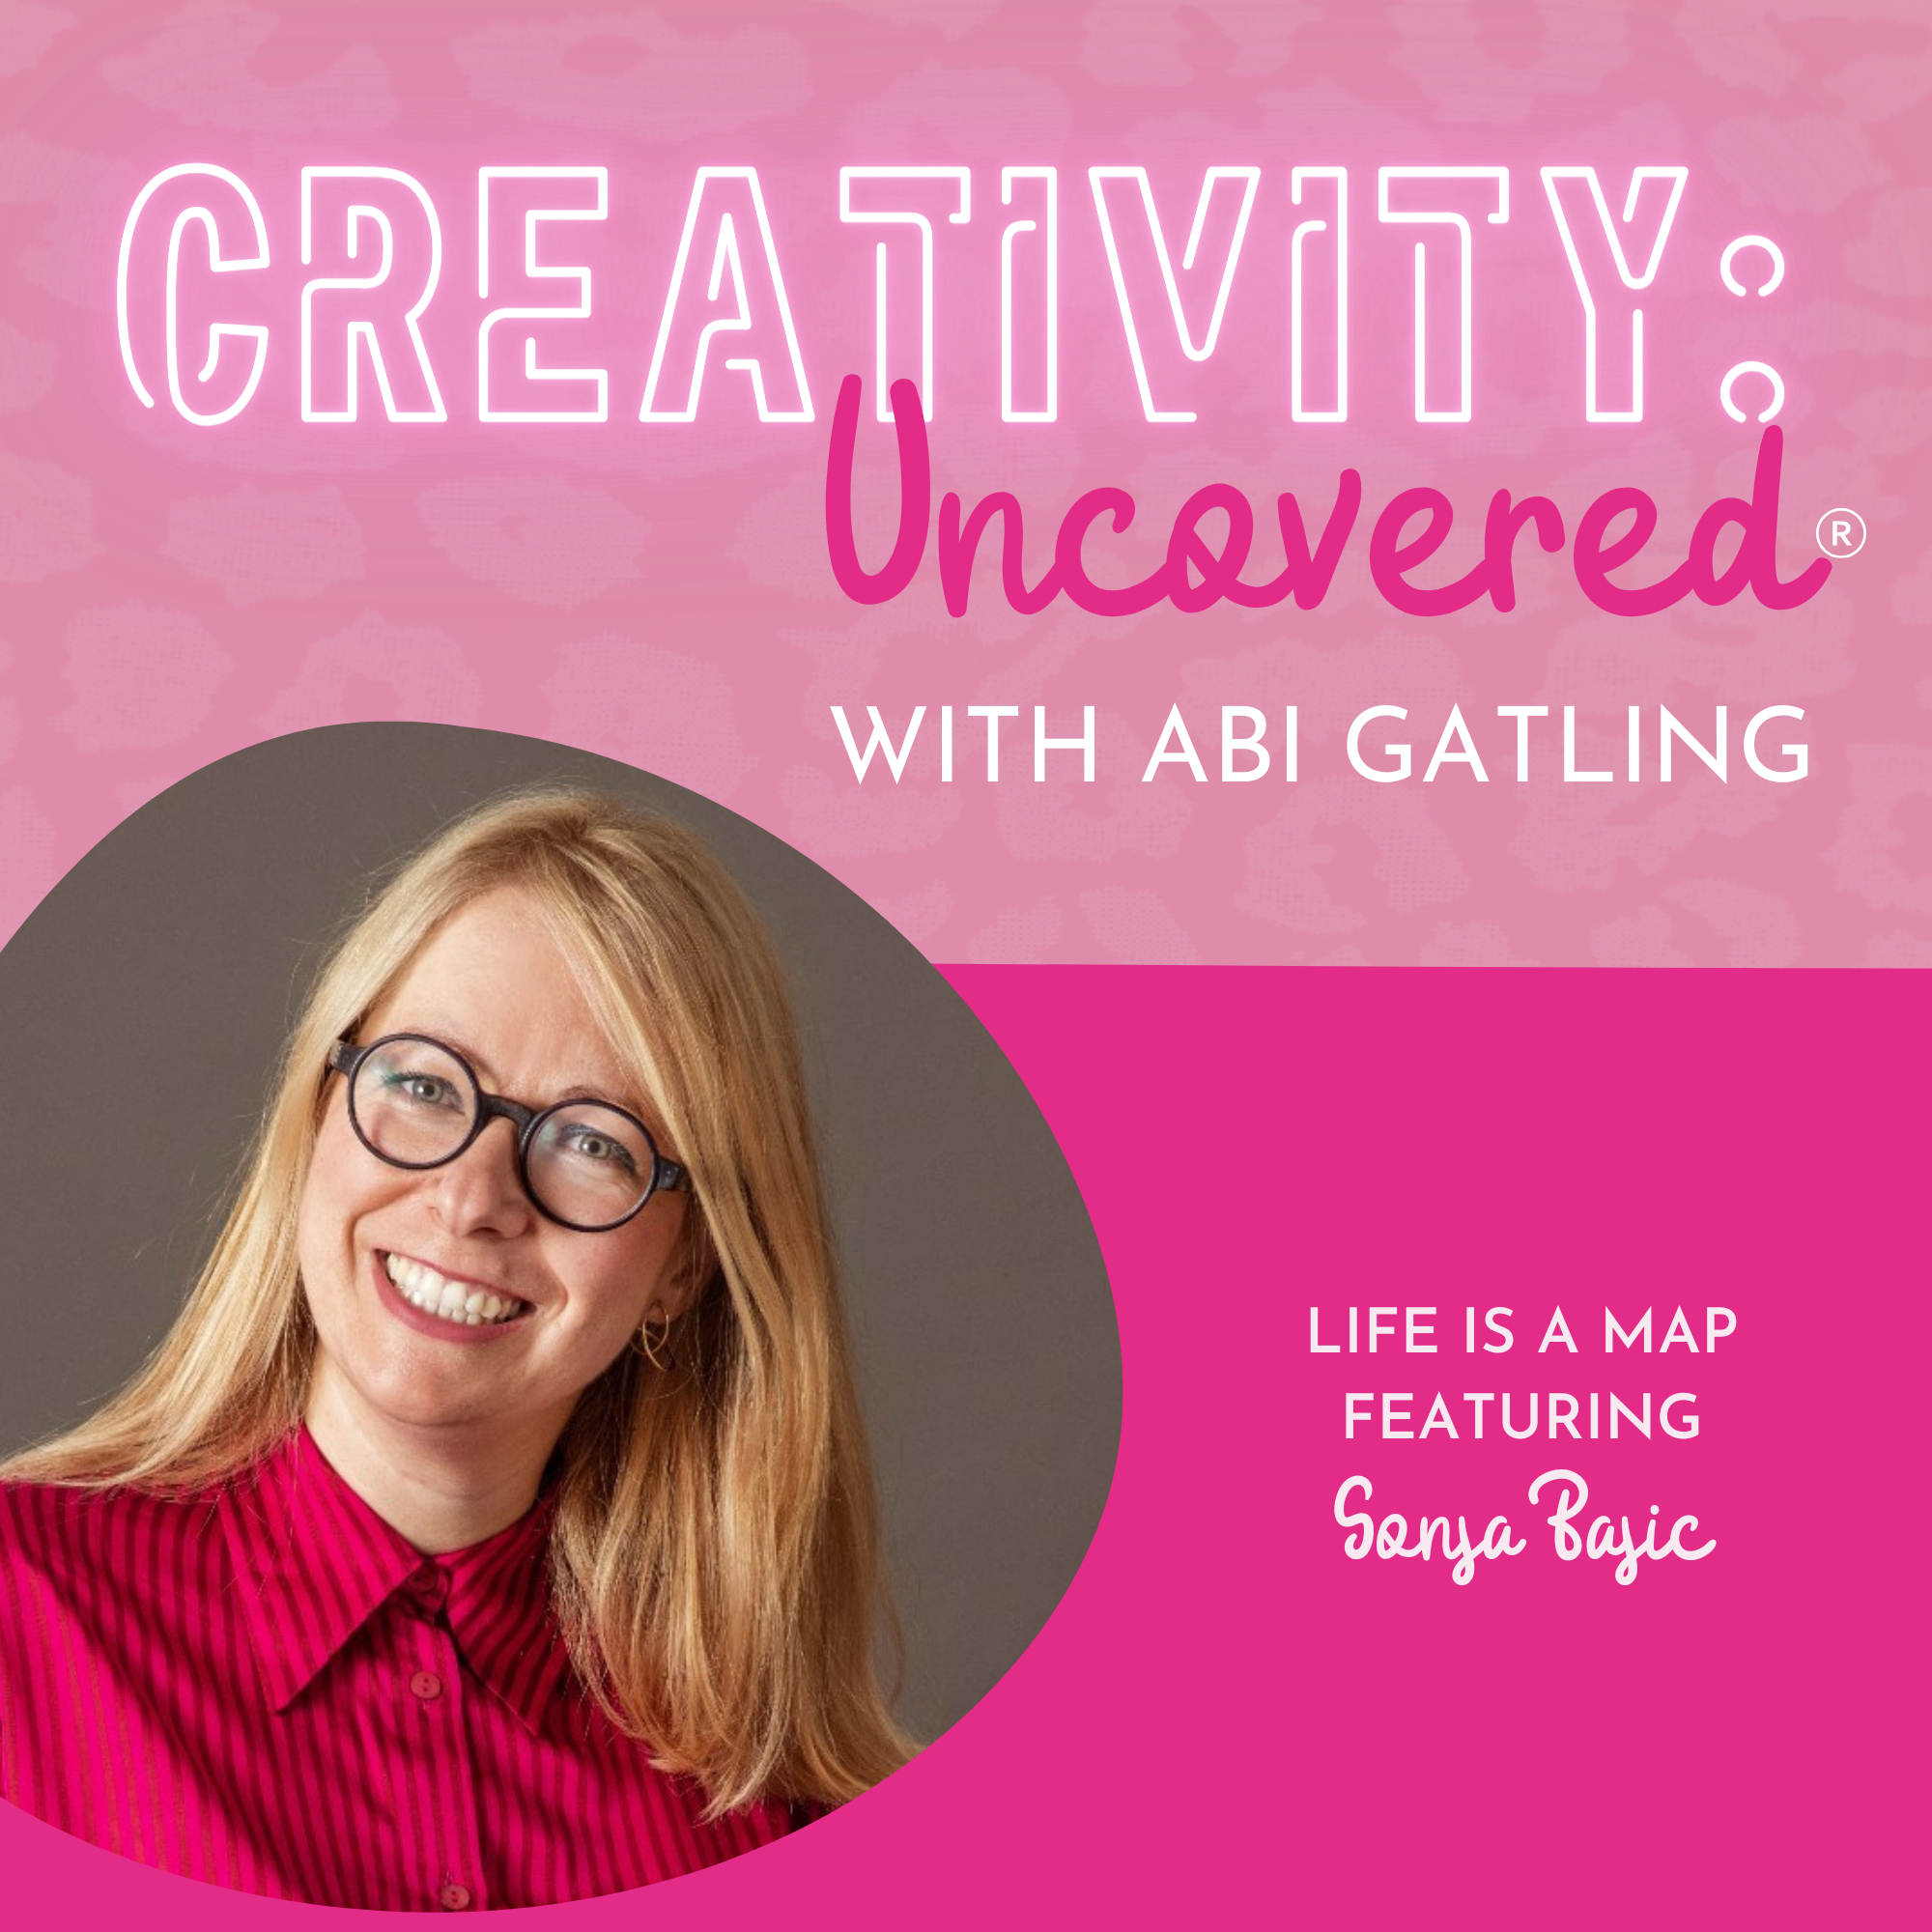 Creativity: Uncovered podcast episode graphic featuring guest Sonja Bajic